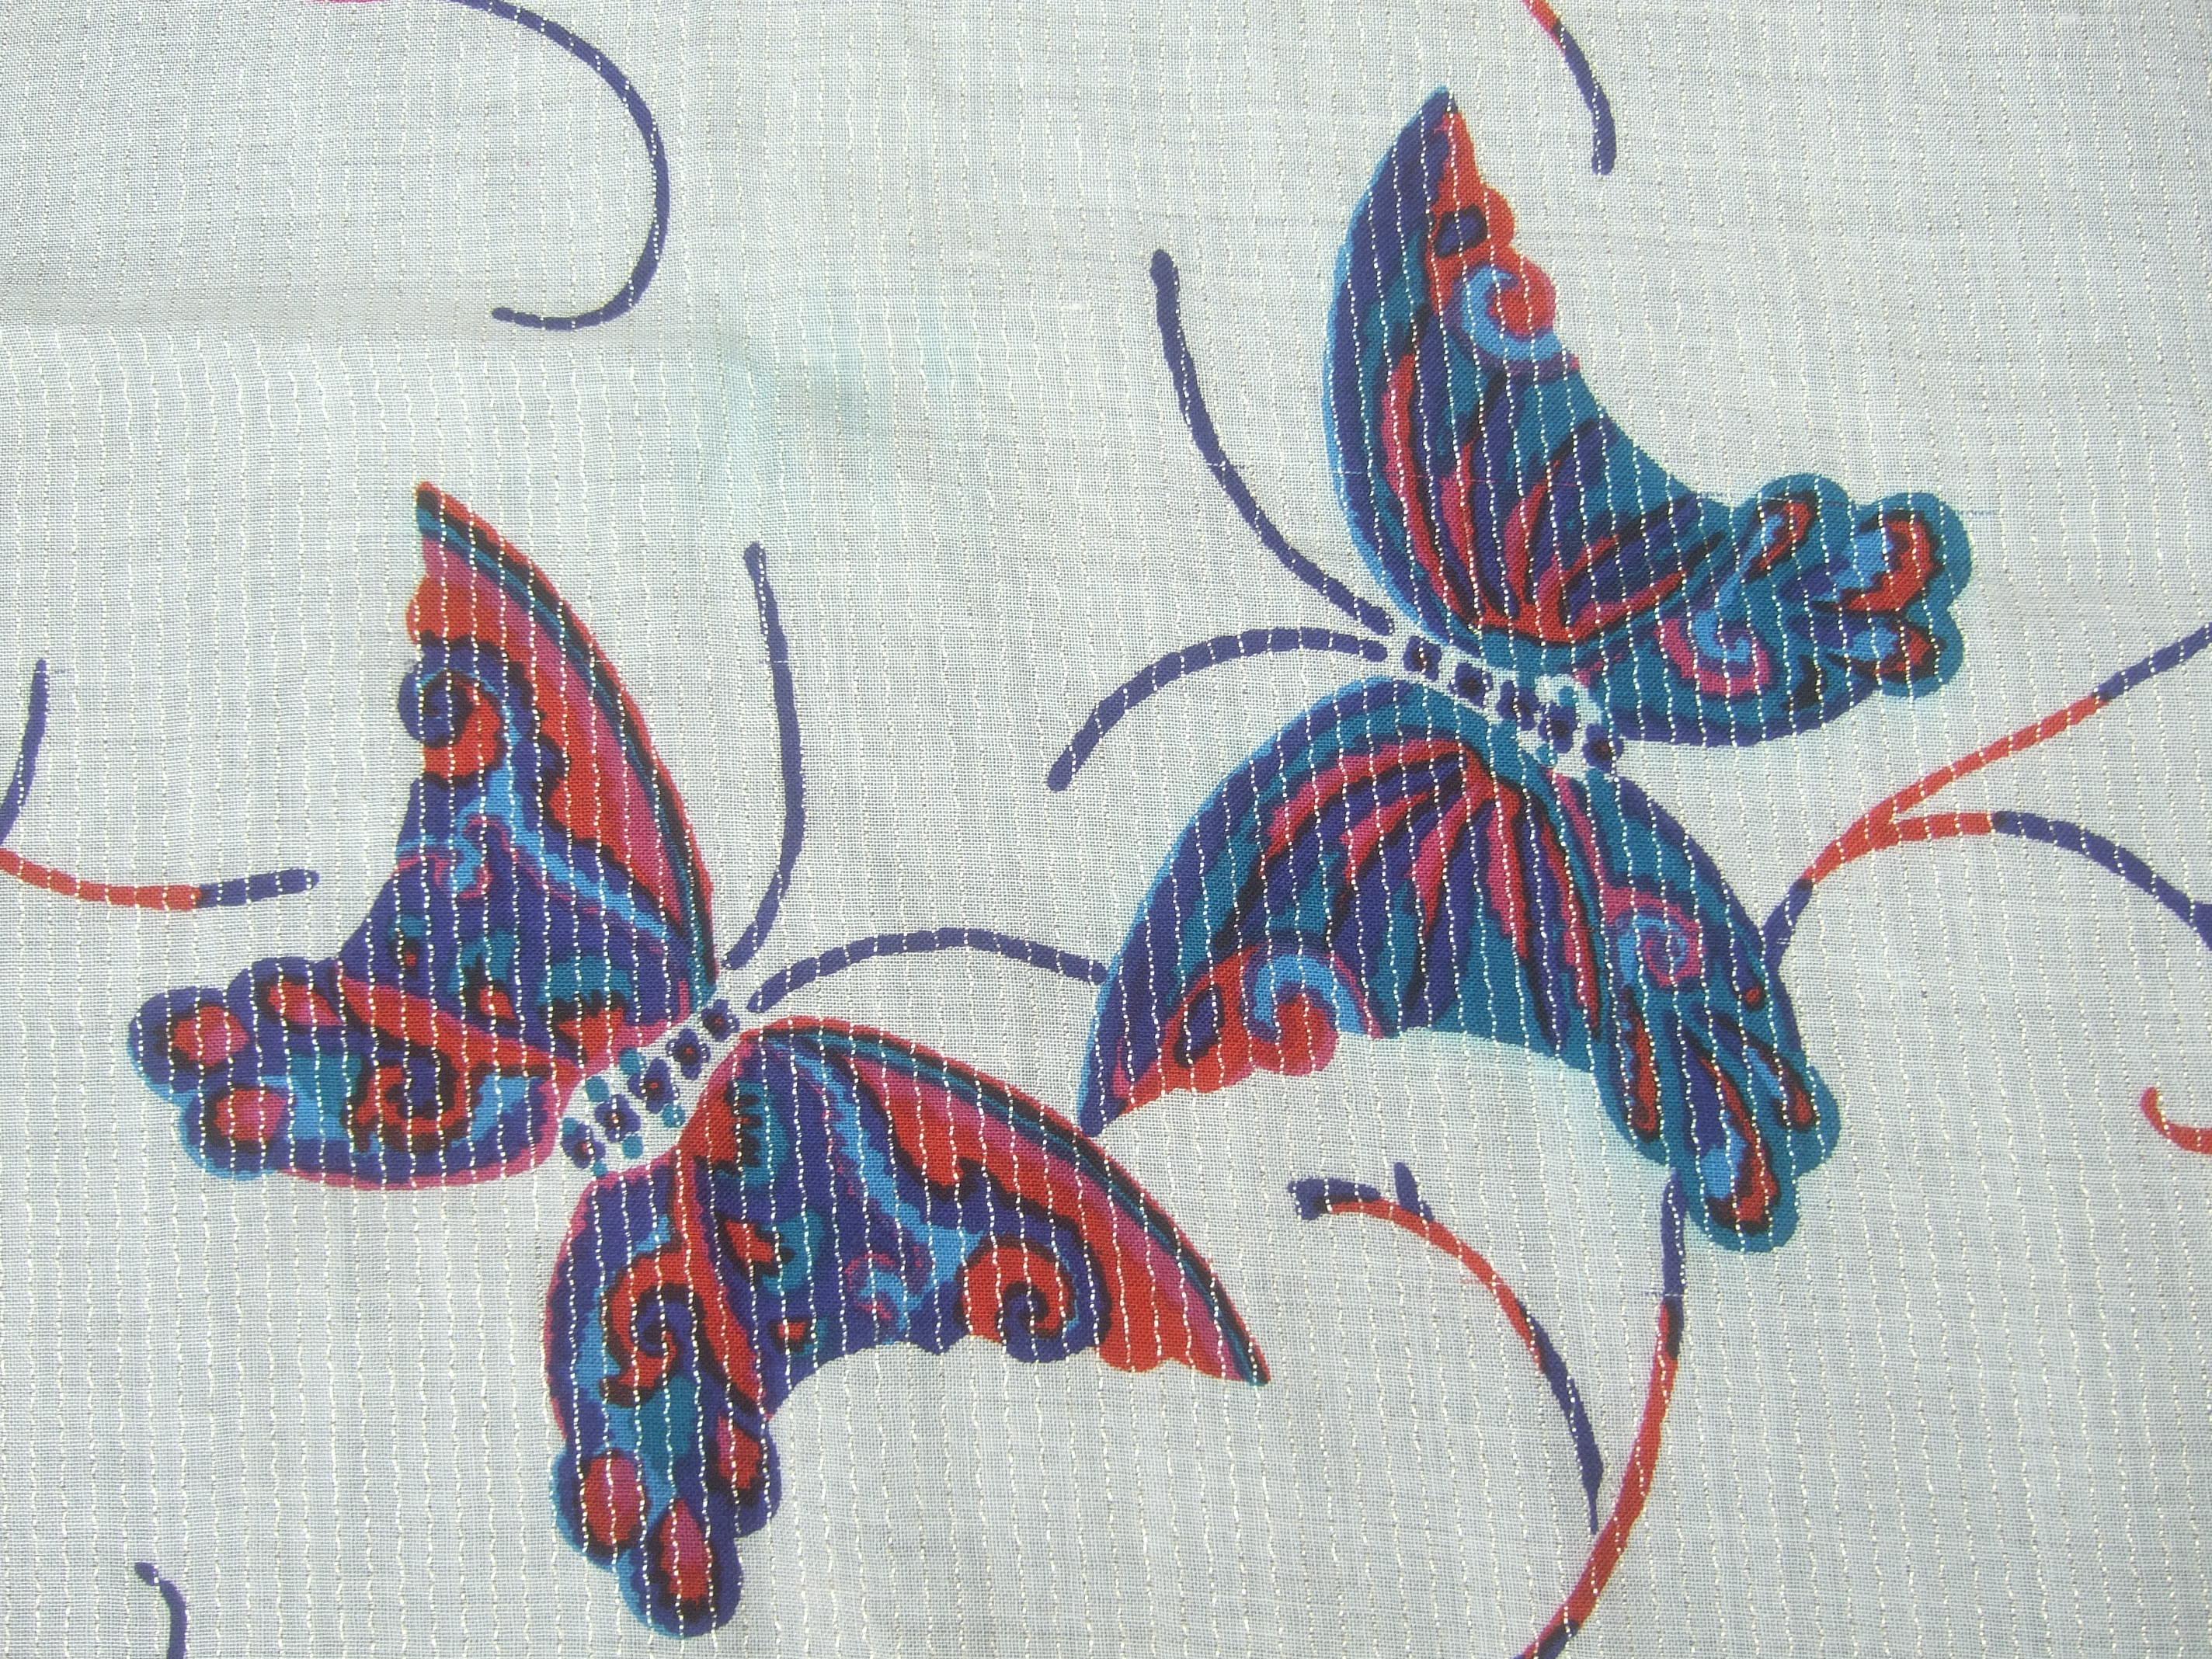 Yves Saint Laurent Large Butterfly Print Scarf - Shawl Wrap 52 x 53 Circa 1970s  6